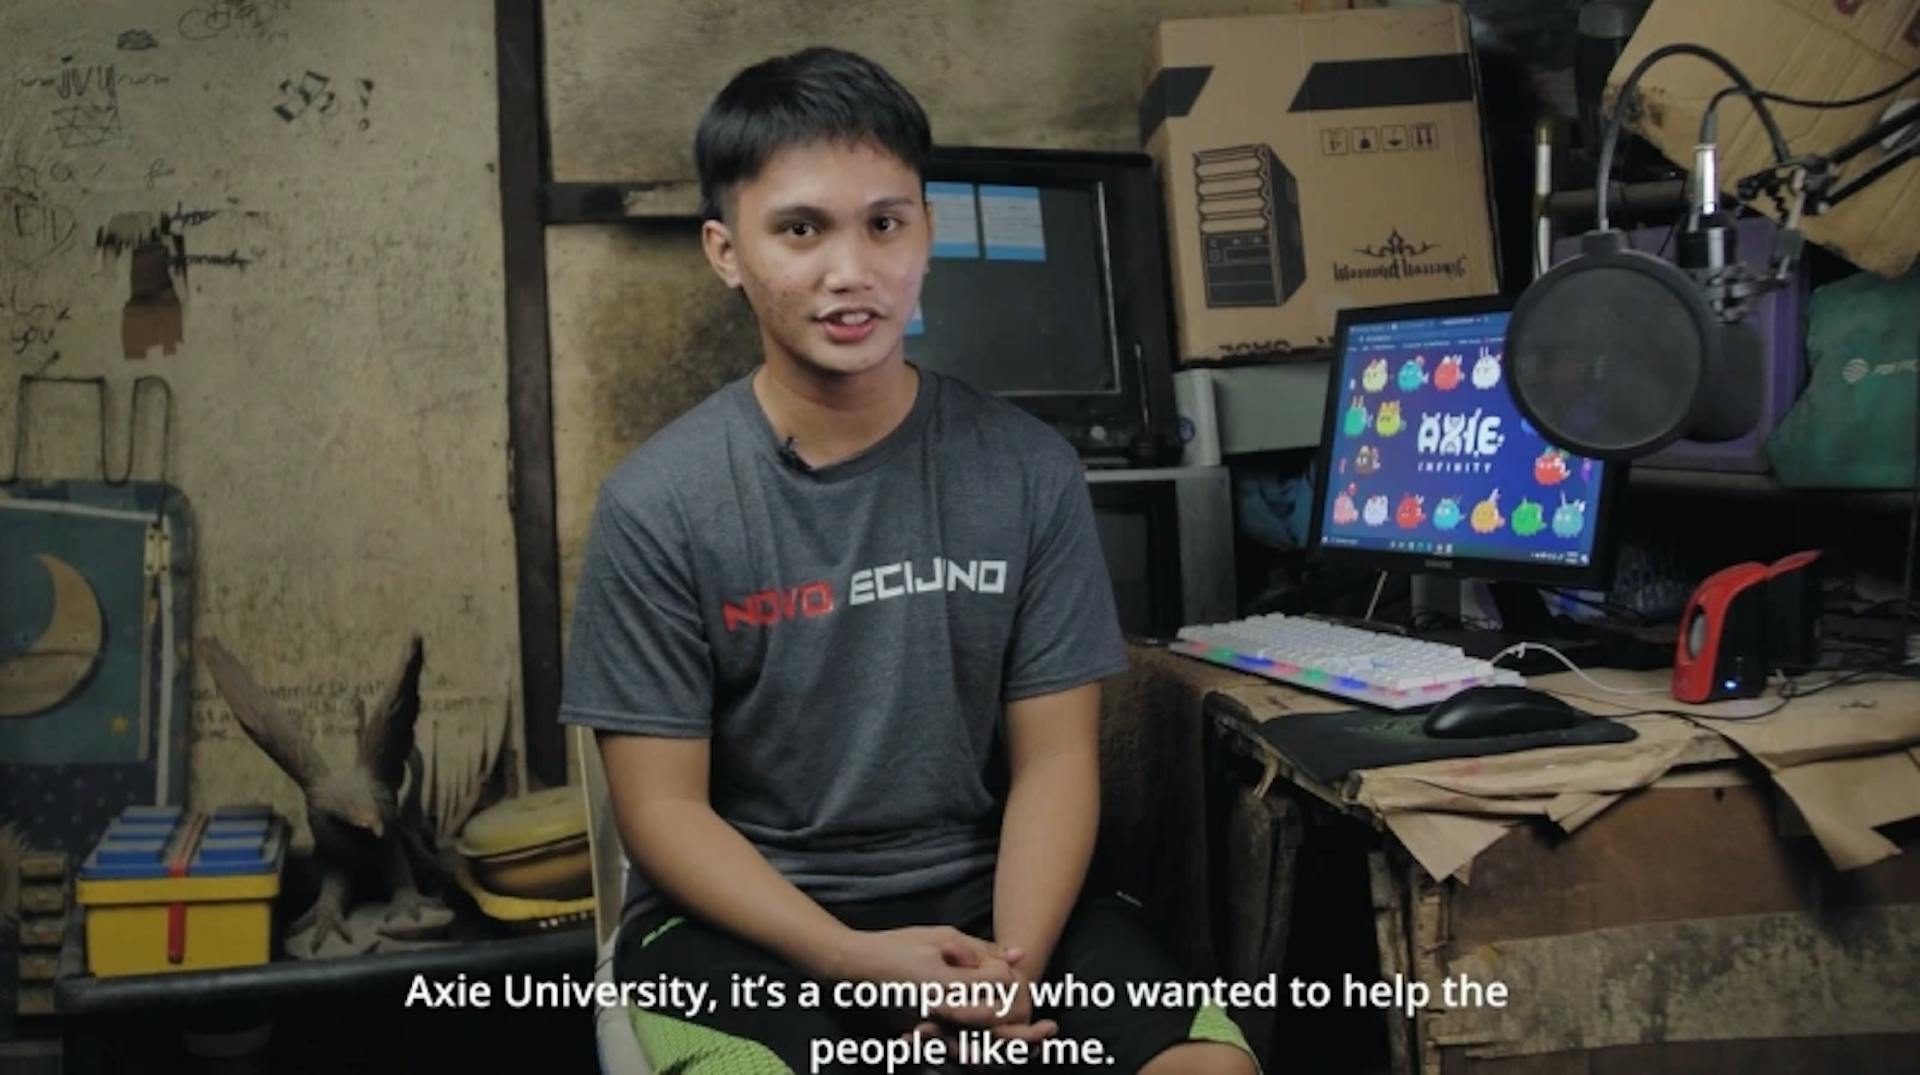 Play-to-Earn gaming provides a sustainable income for gamers in the Philippines - image from VentureBeat.com